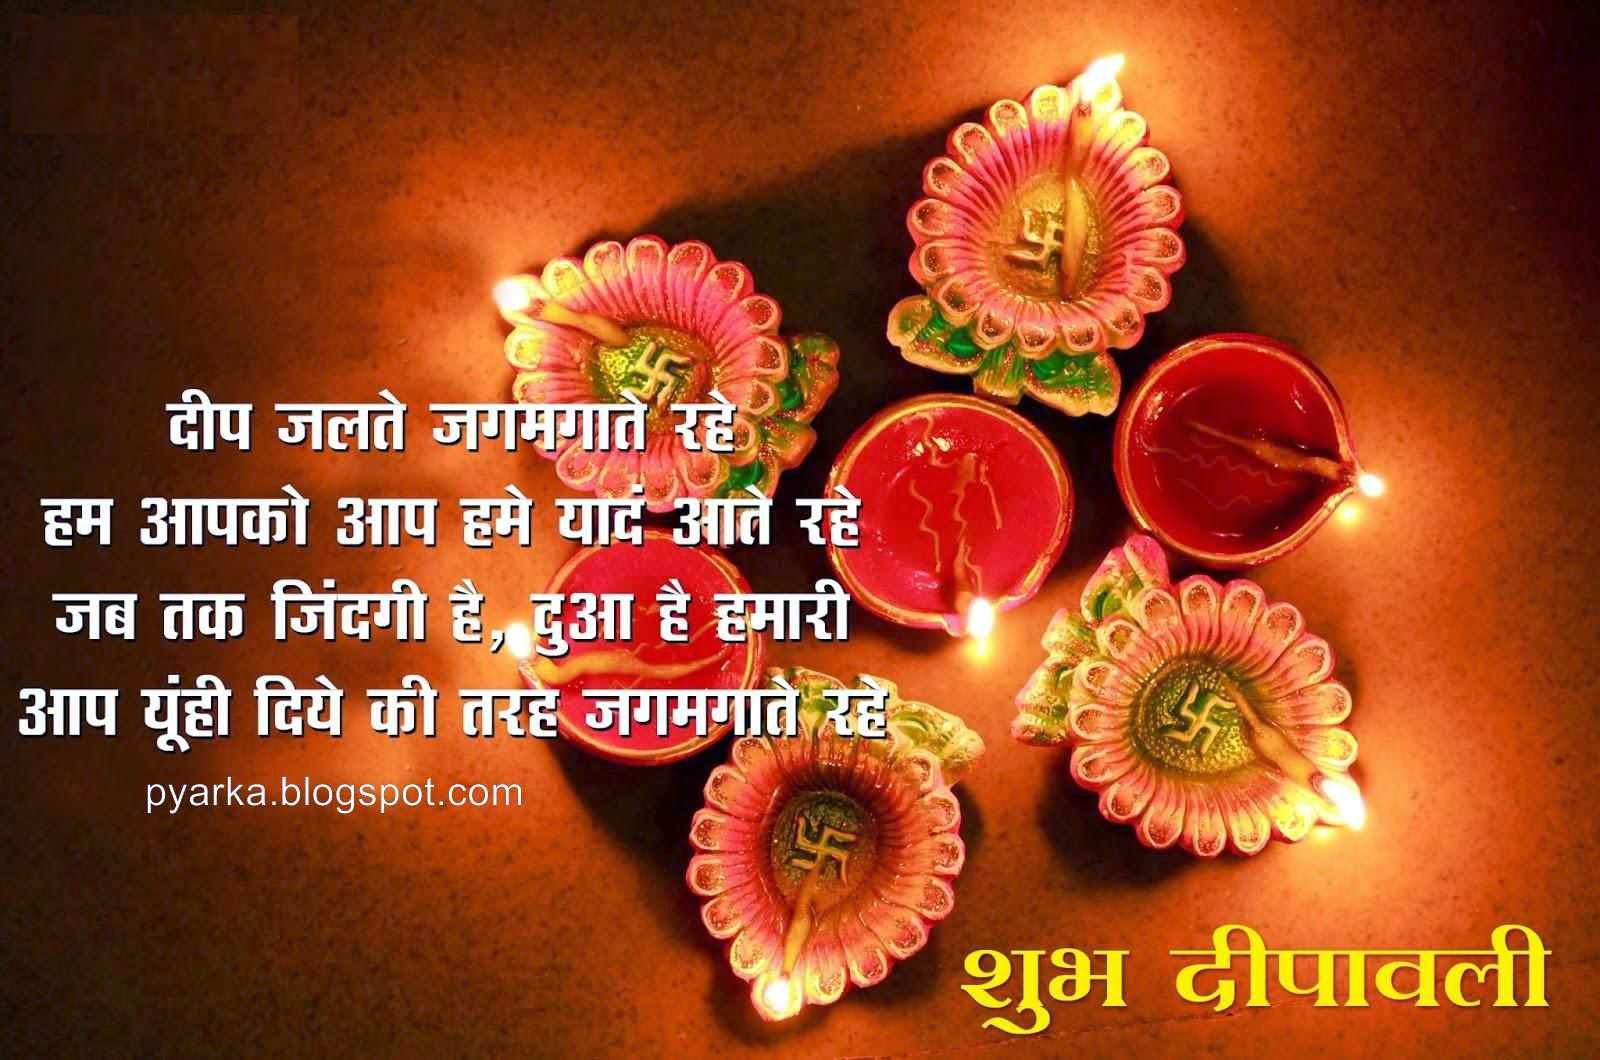 Happy Diwali Hindi Sms Message Wishes Quotes Shubh